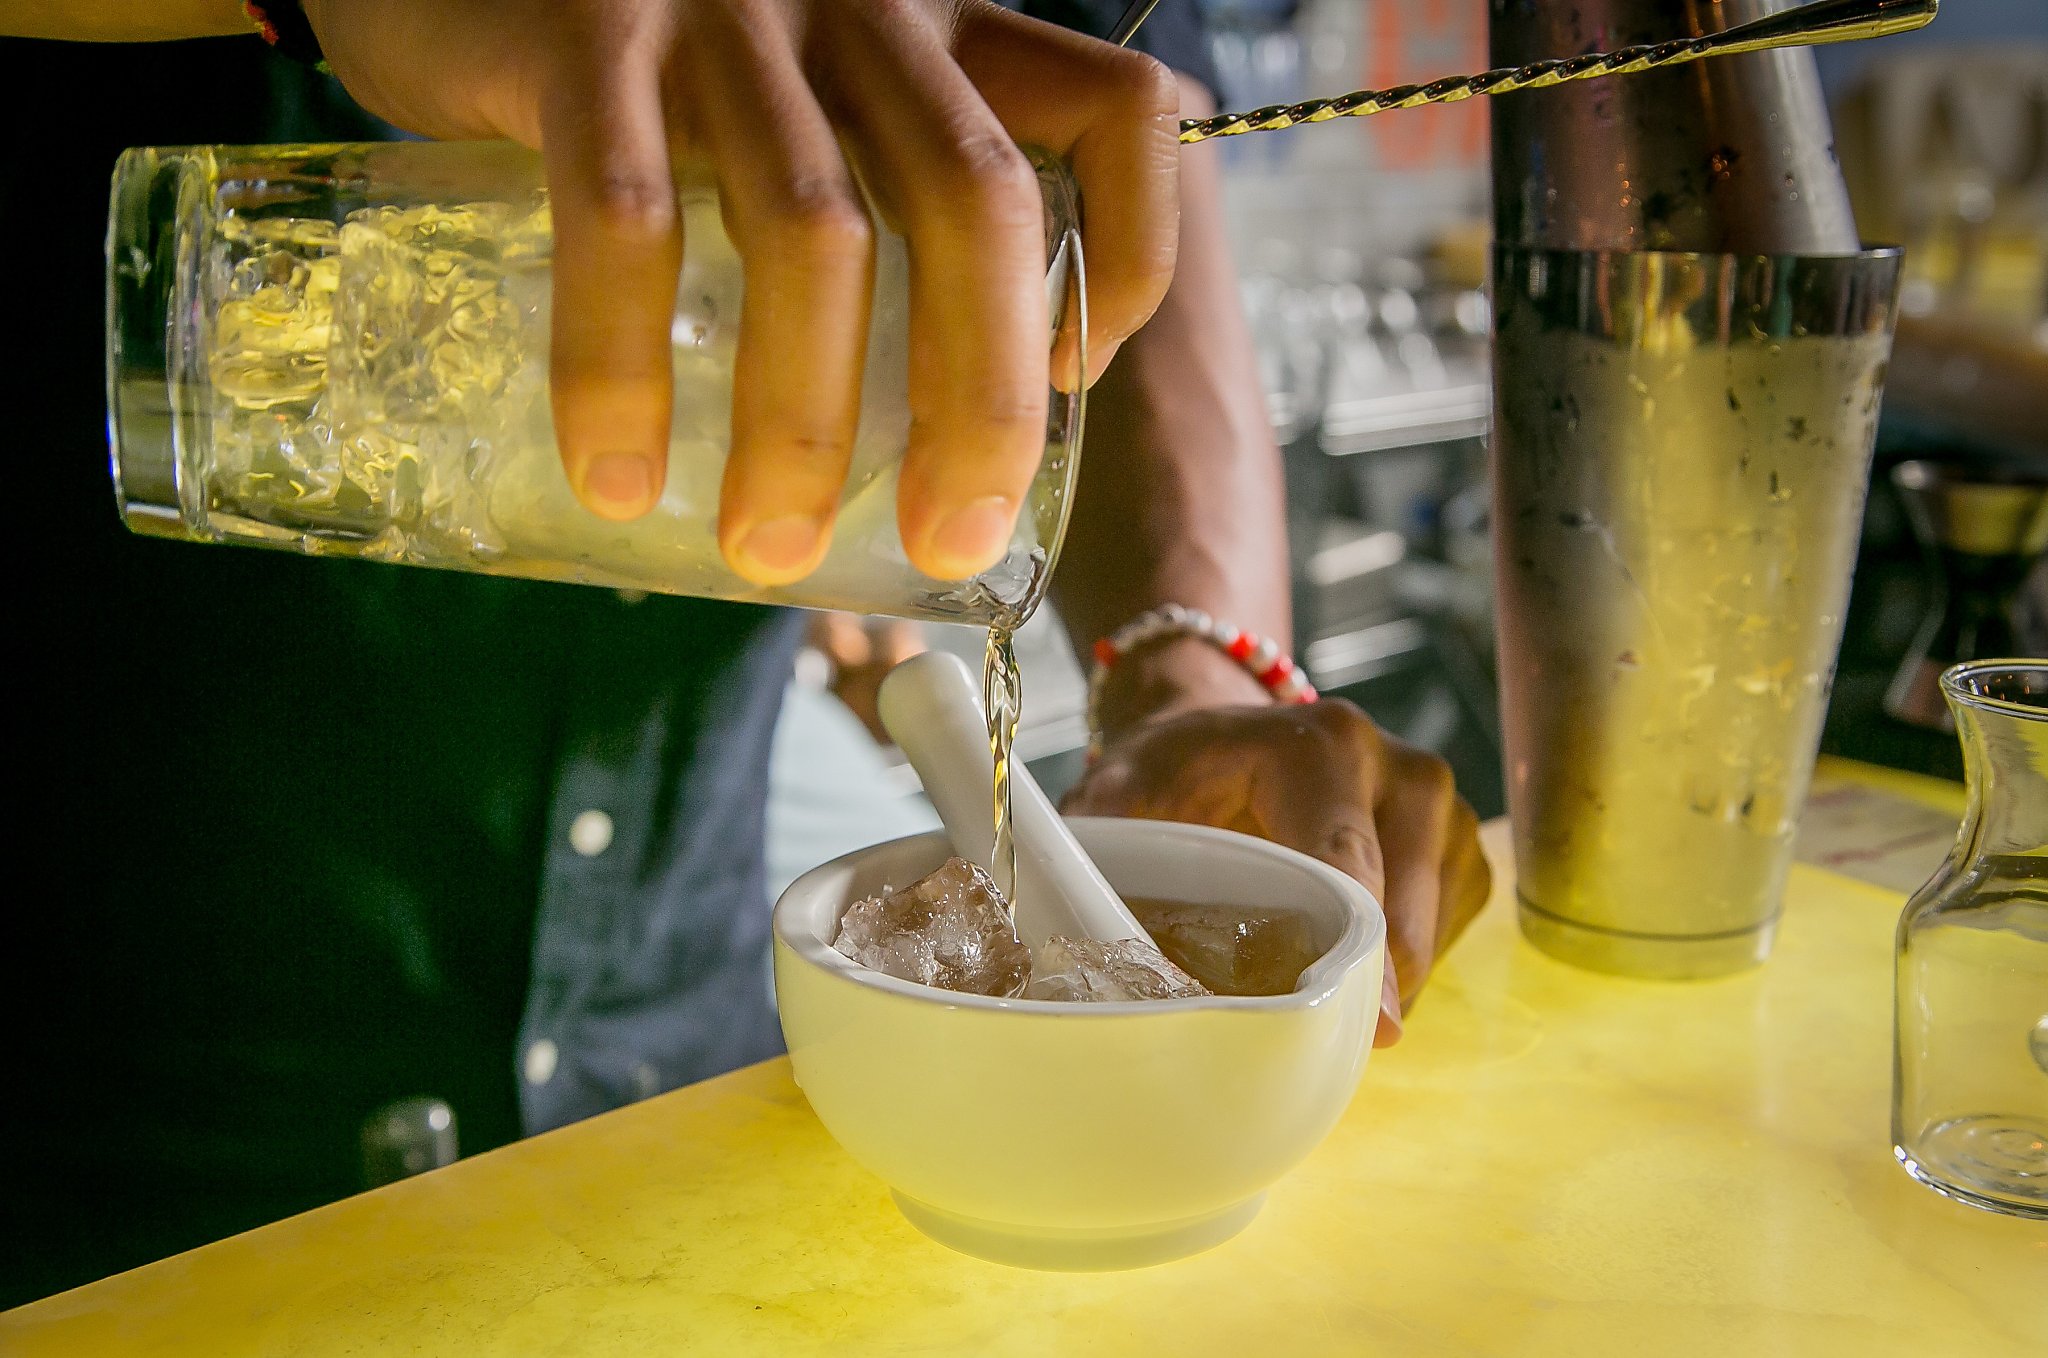 Mortar & Pestle: Drinks with a twist from Curry Up Now folks - SFGate2048 x 1358